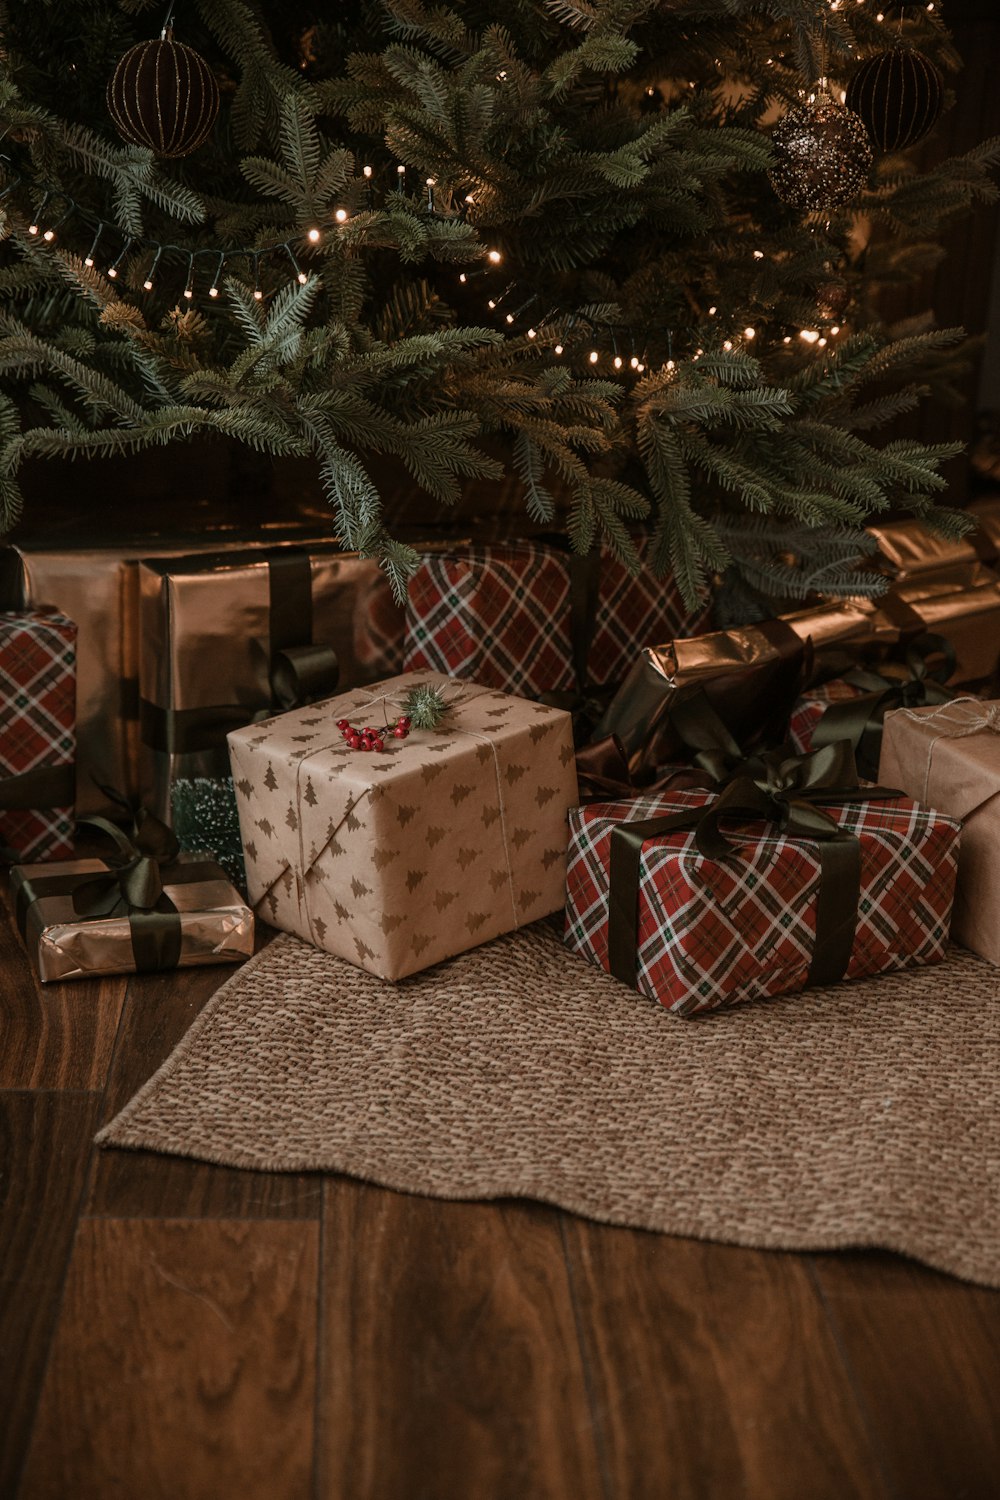 presents under a christmas tree